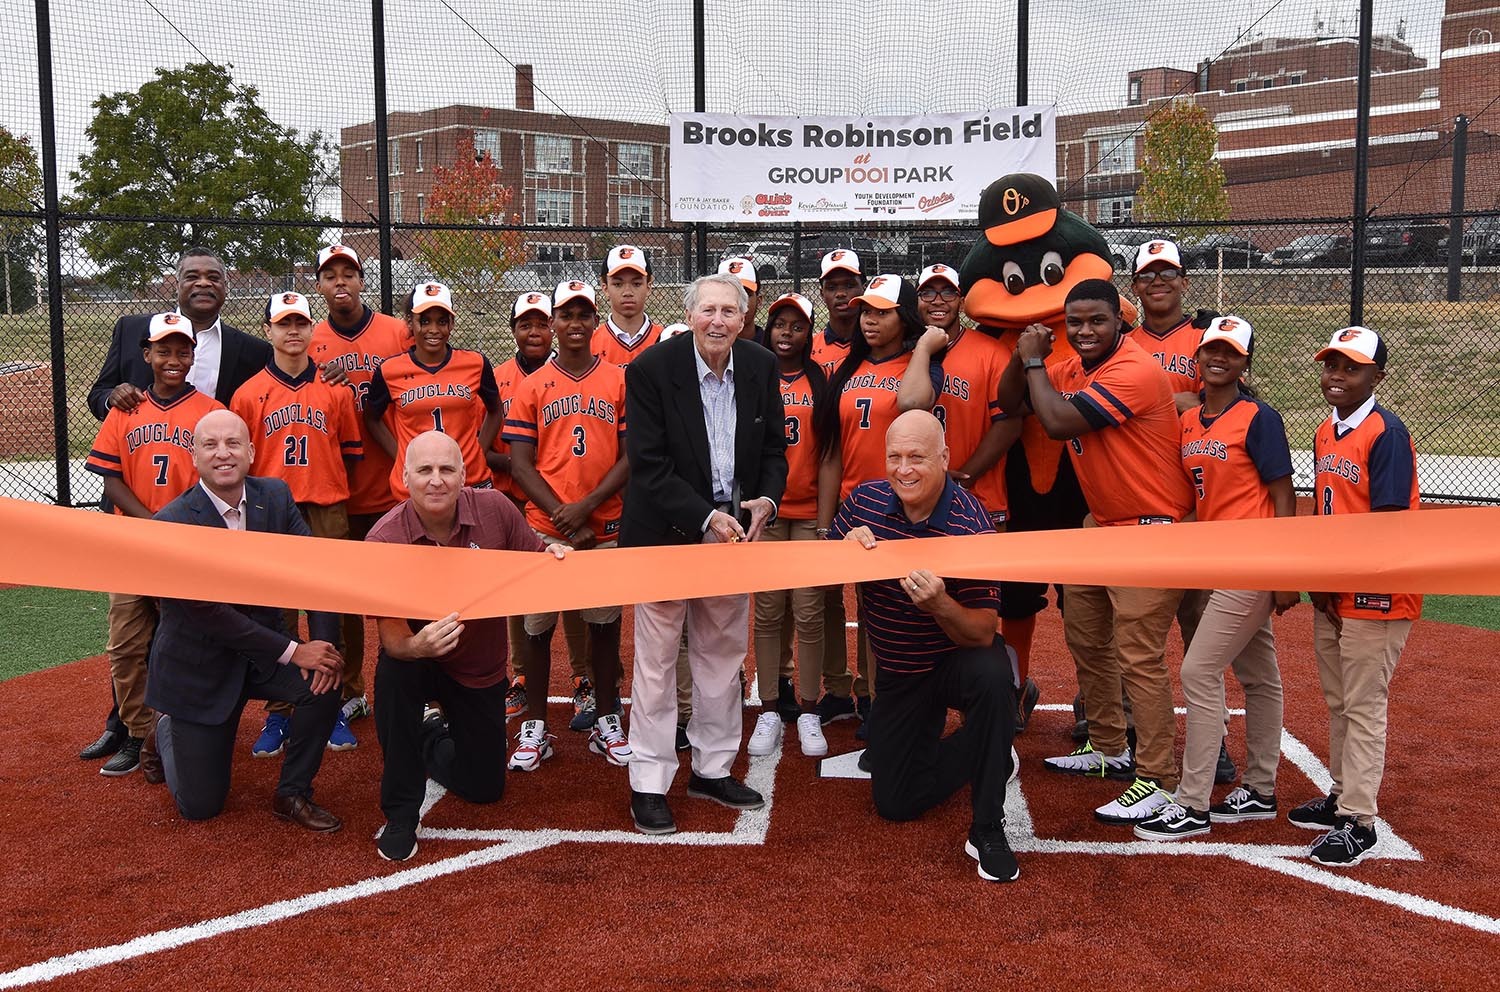 Brooks Robinson “Field of Dreams” is Now a Reality in West